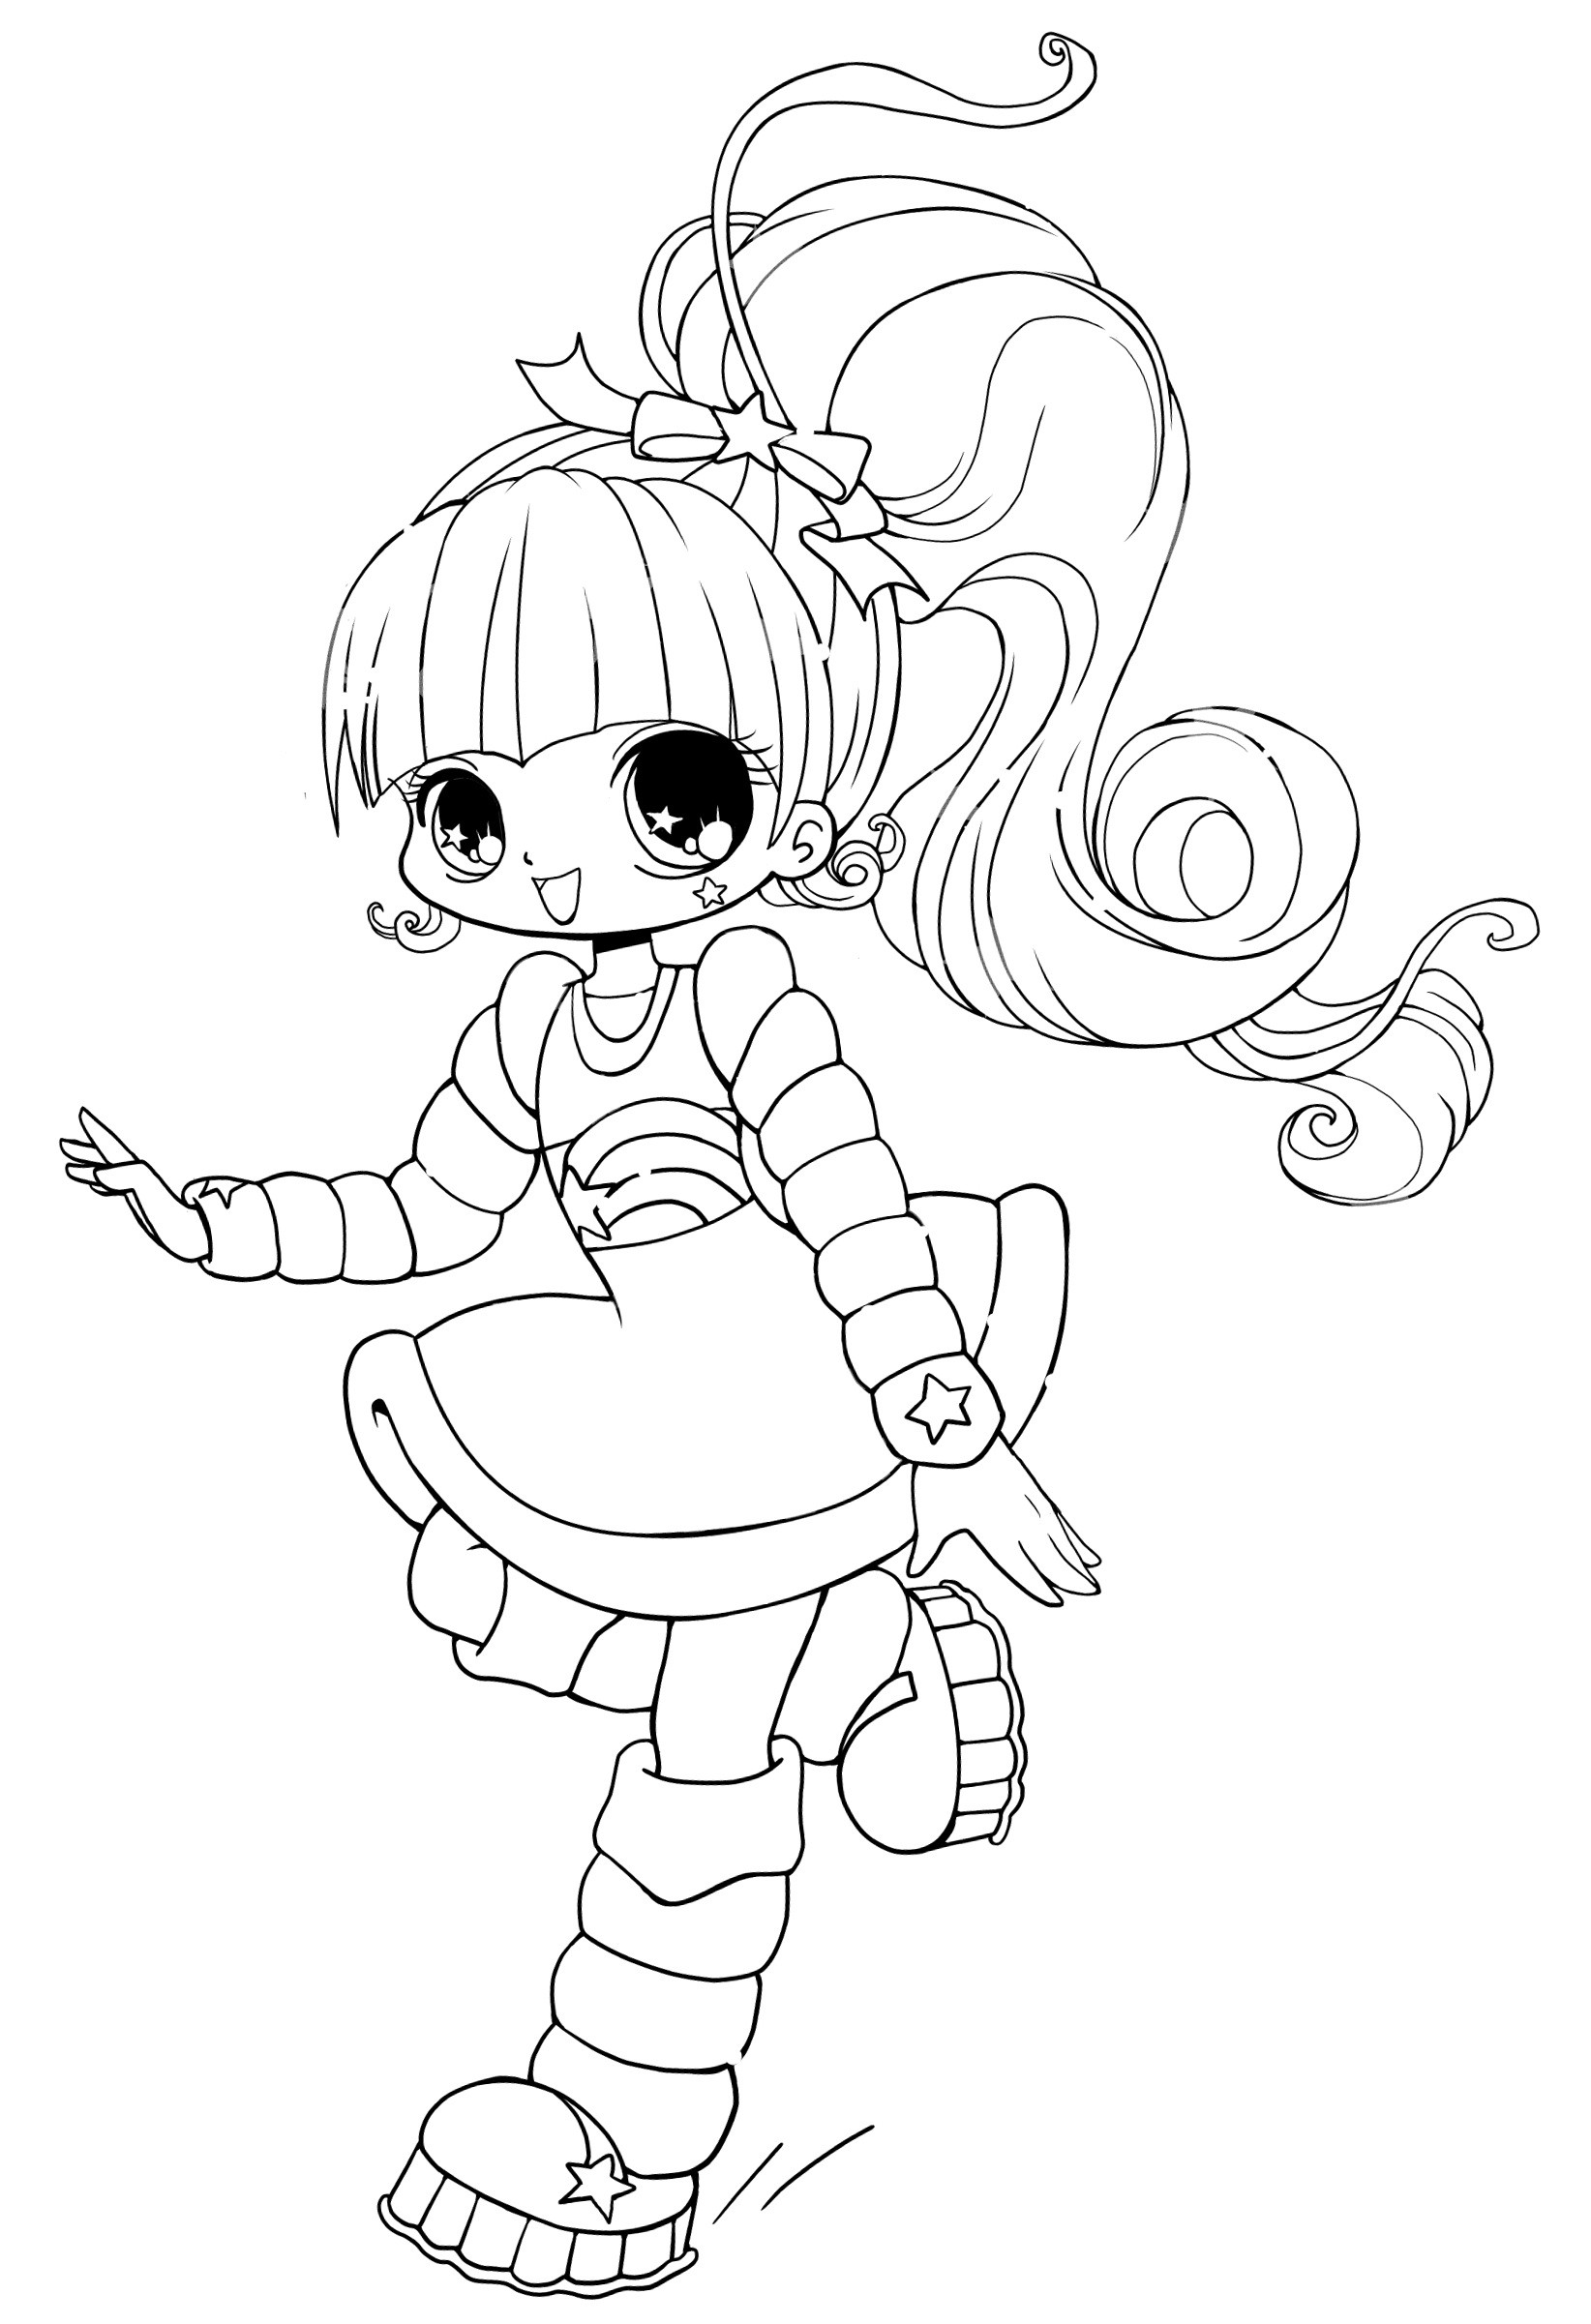 25 Ideas for Kawaii Girls Coloring Pages - Home, Family, Style and Art ...